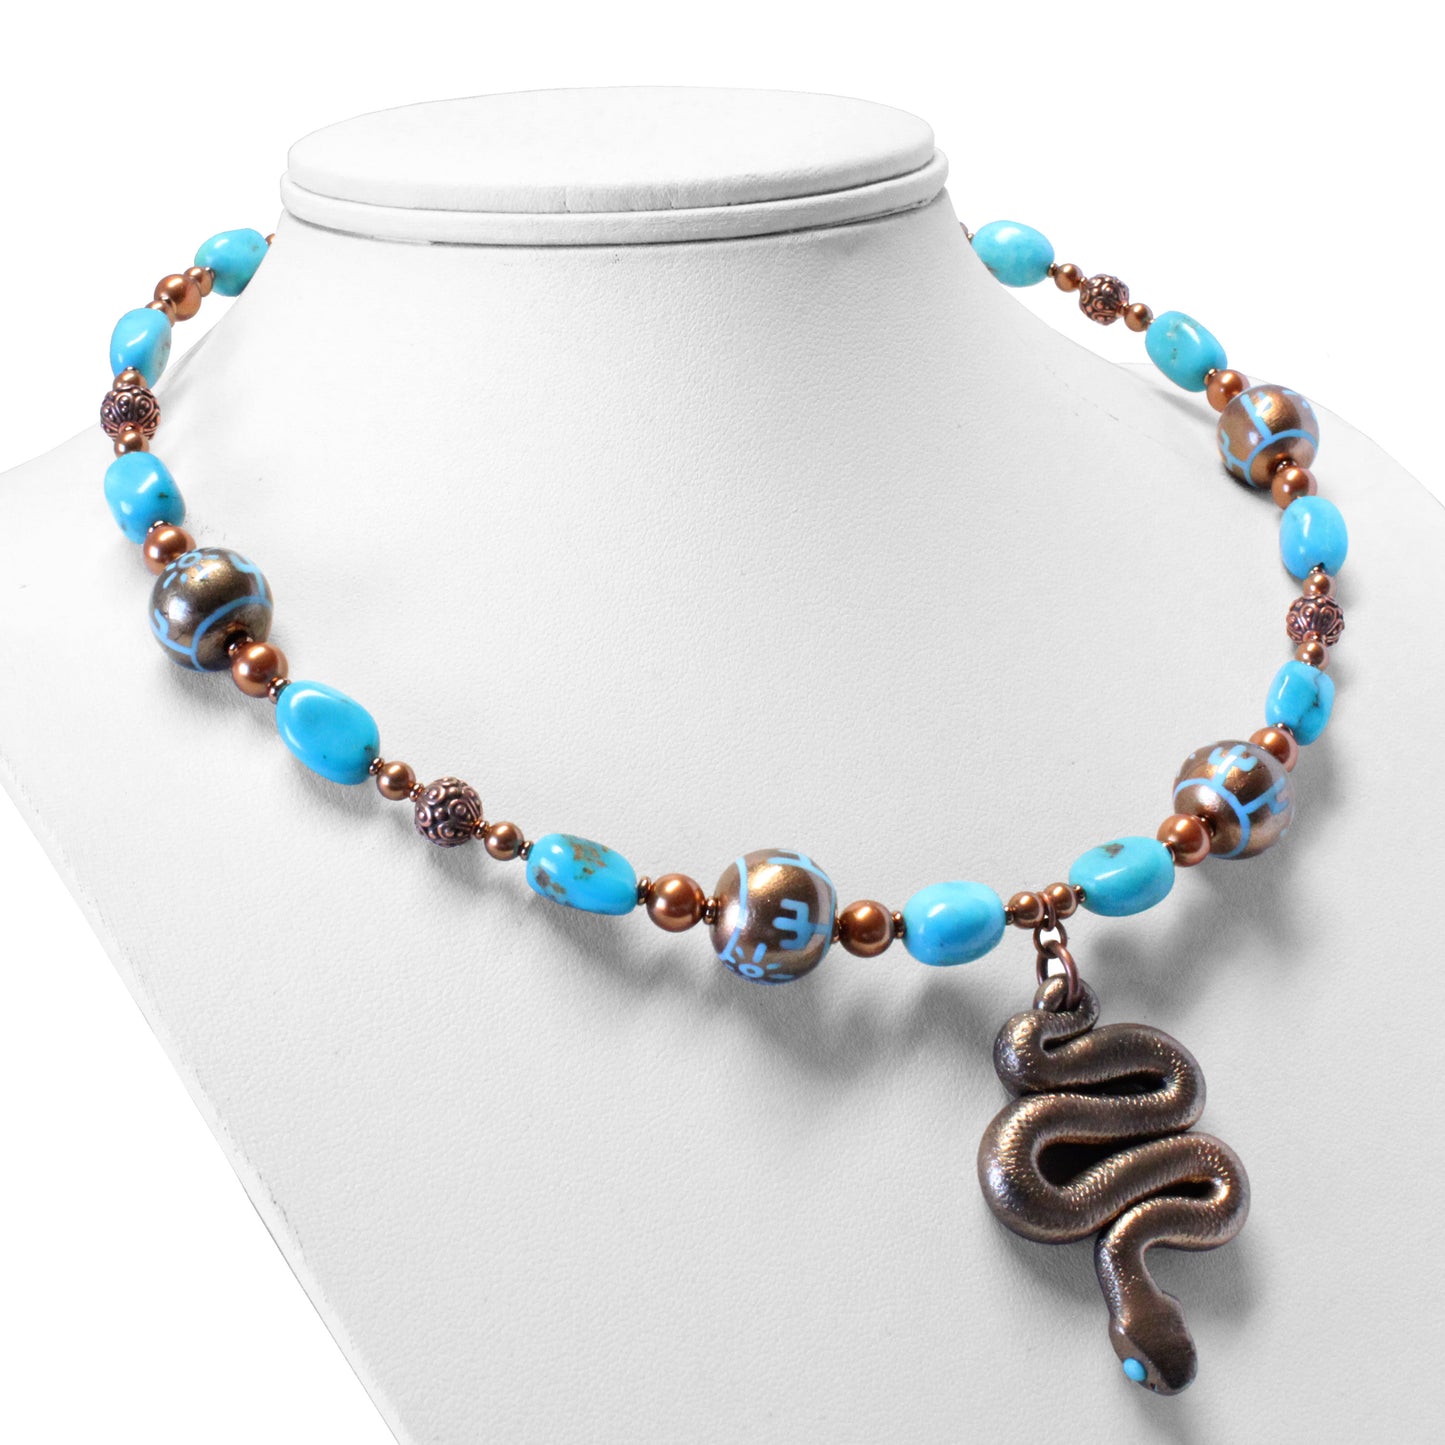 Turquoise Desert Scene Necklace / 16-18 Inch length / Nacozari turquoise gemstones /  hand-painted pendant and beads